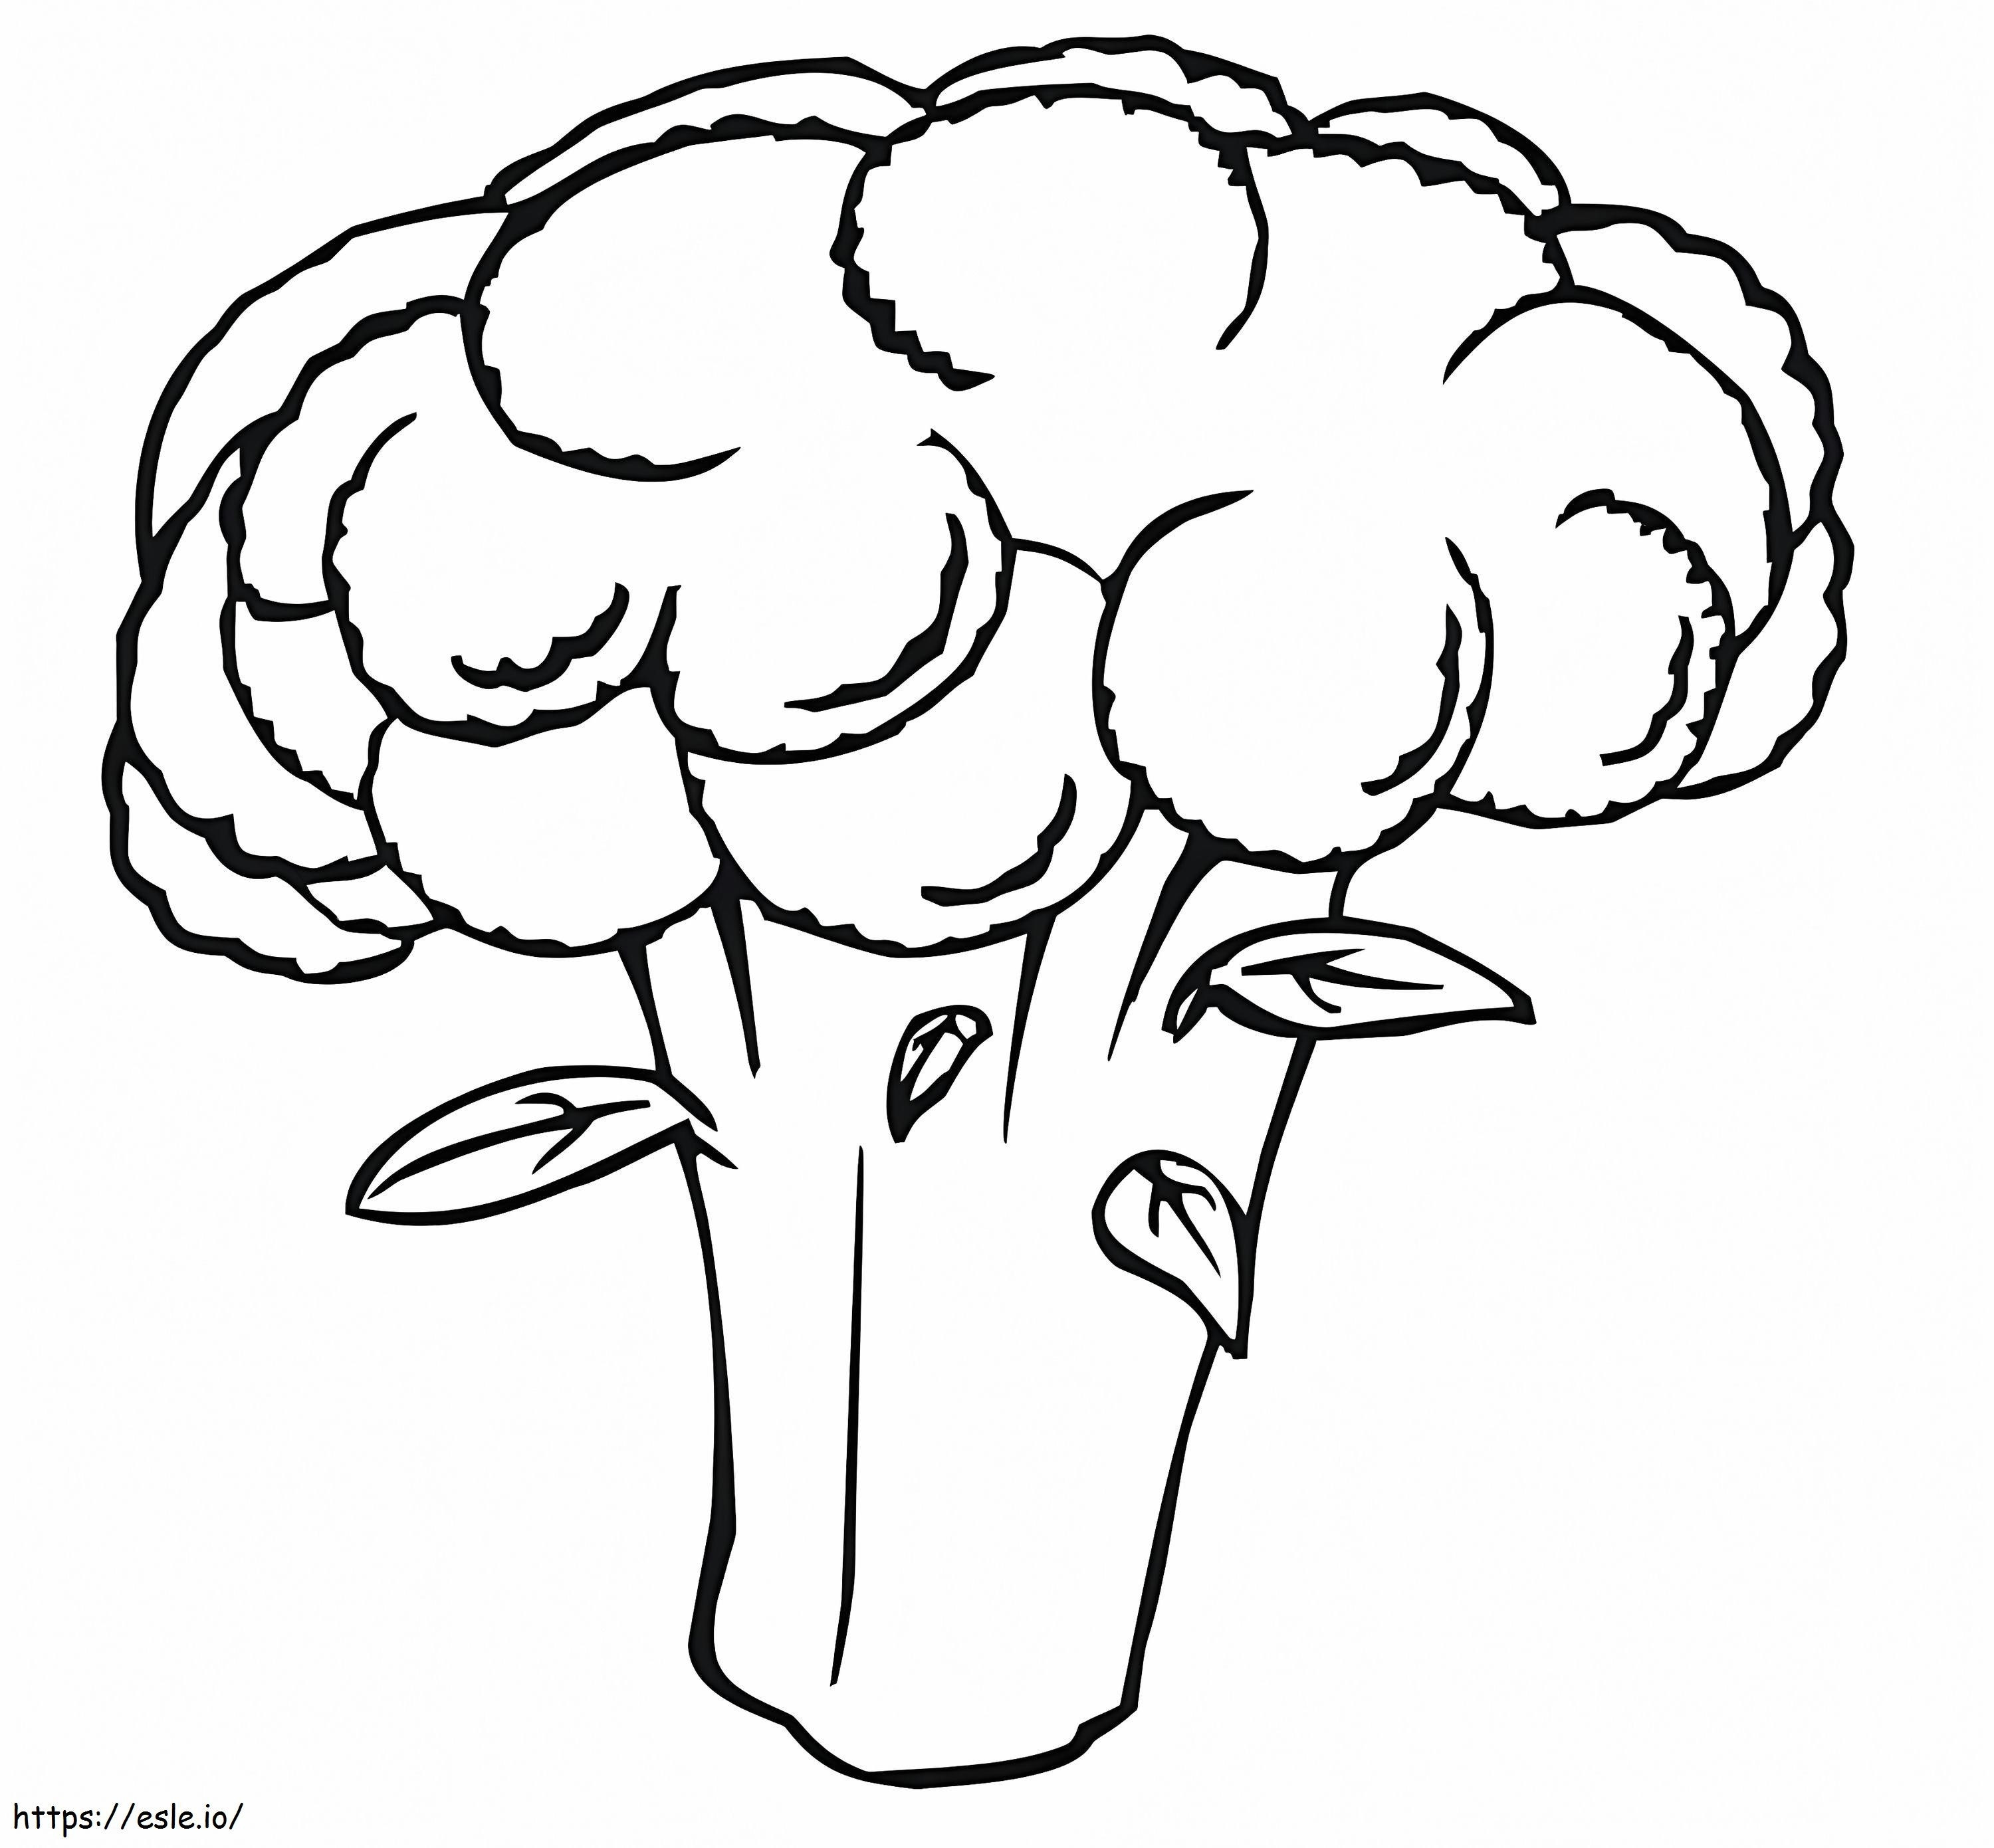 White Cauliflower coloring page